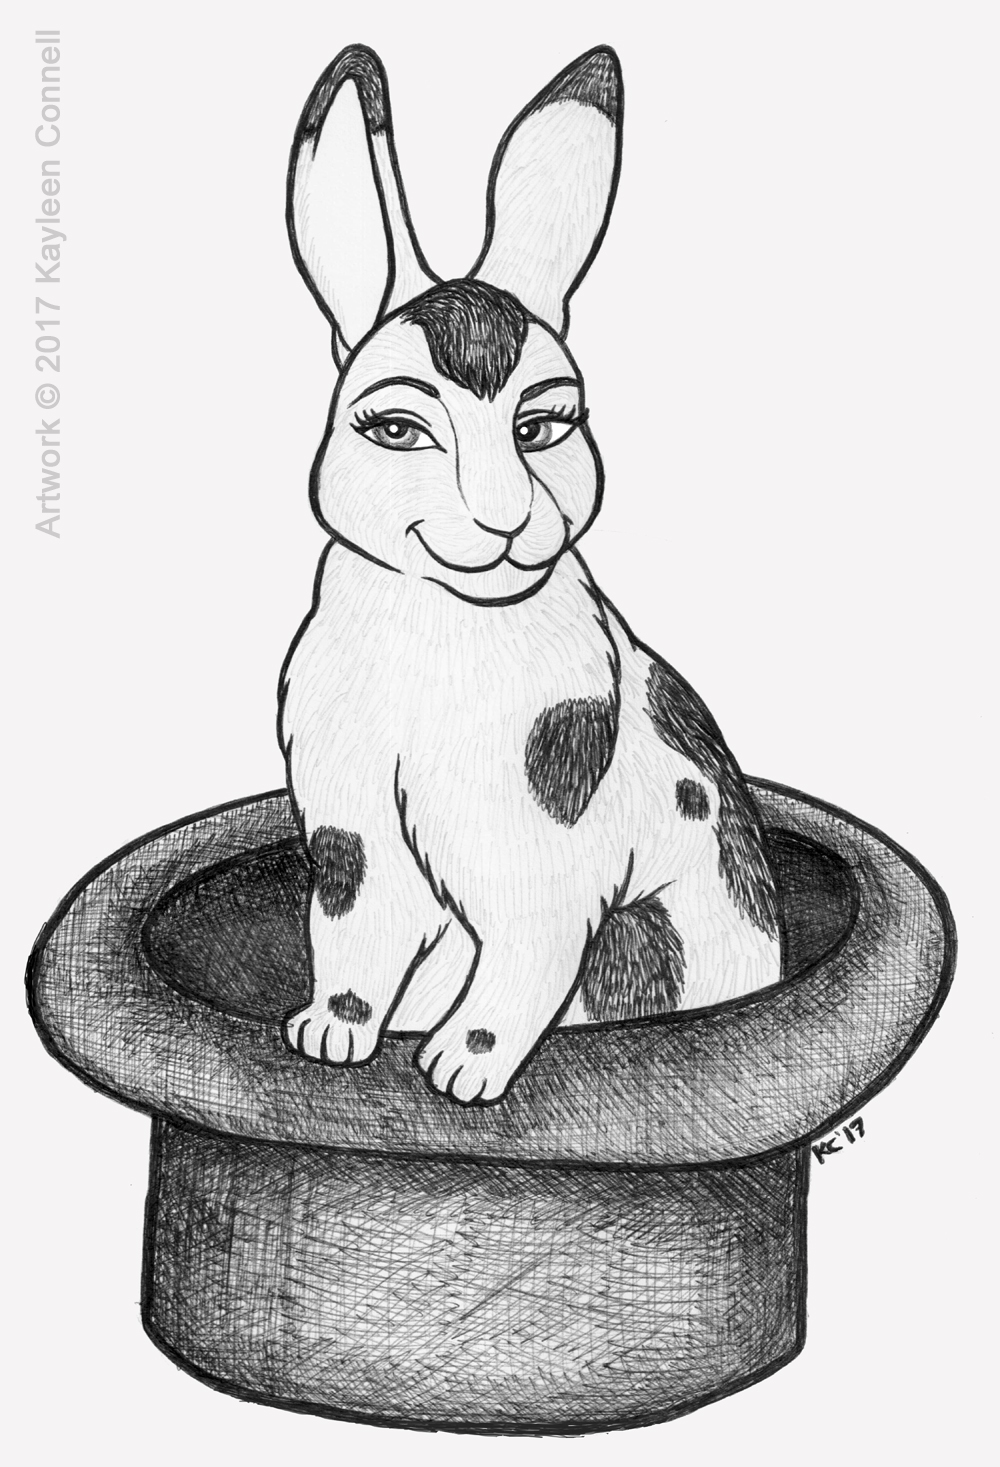 Most recent image: Bunny Hat